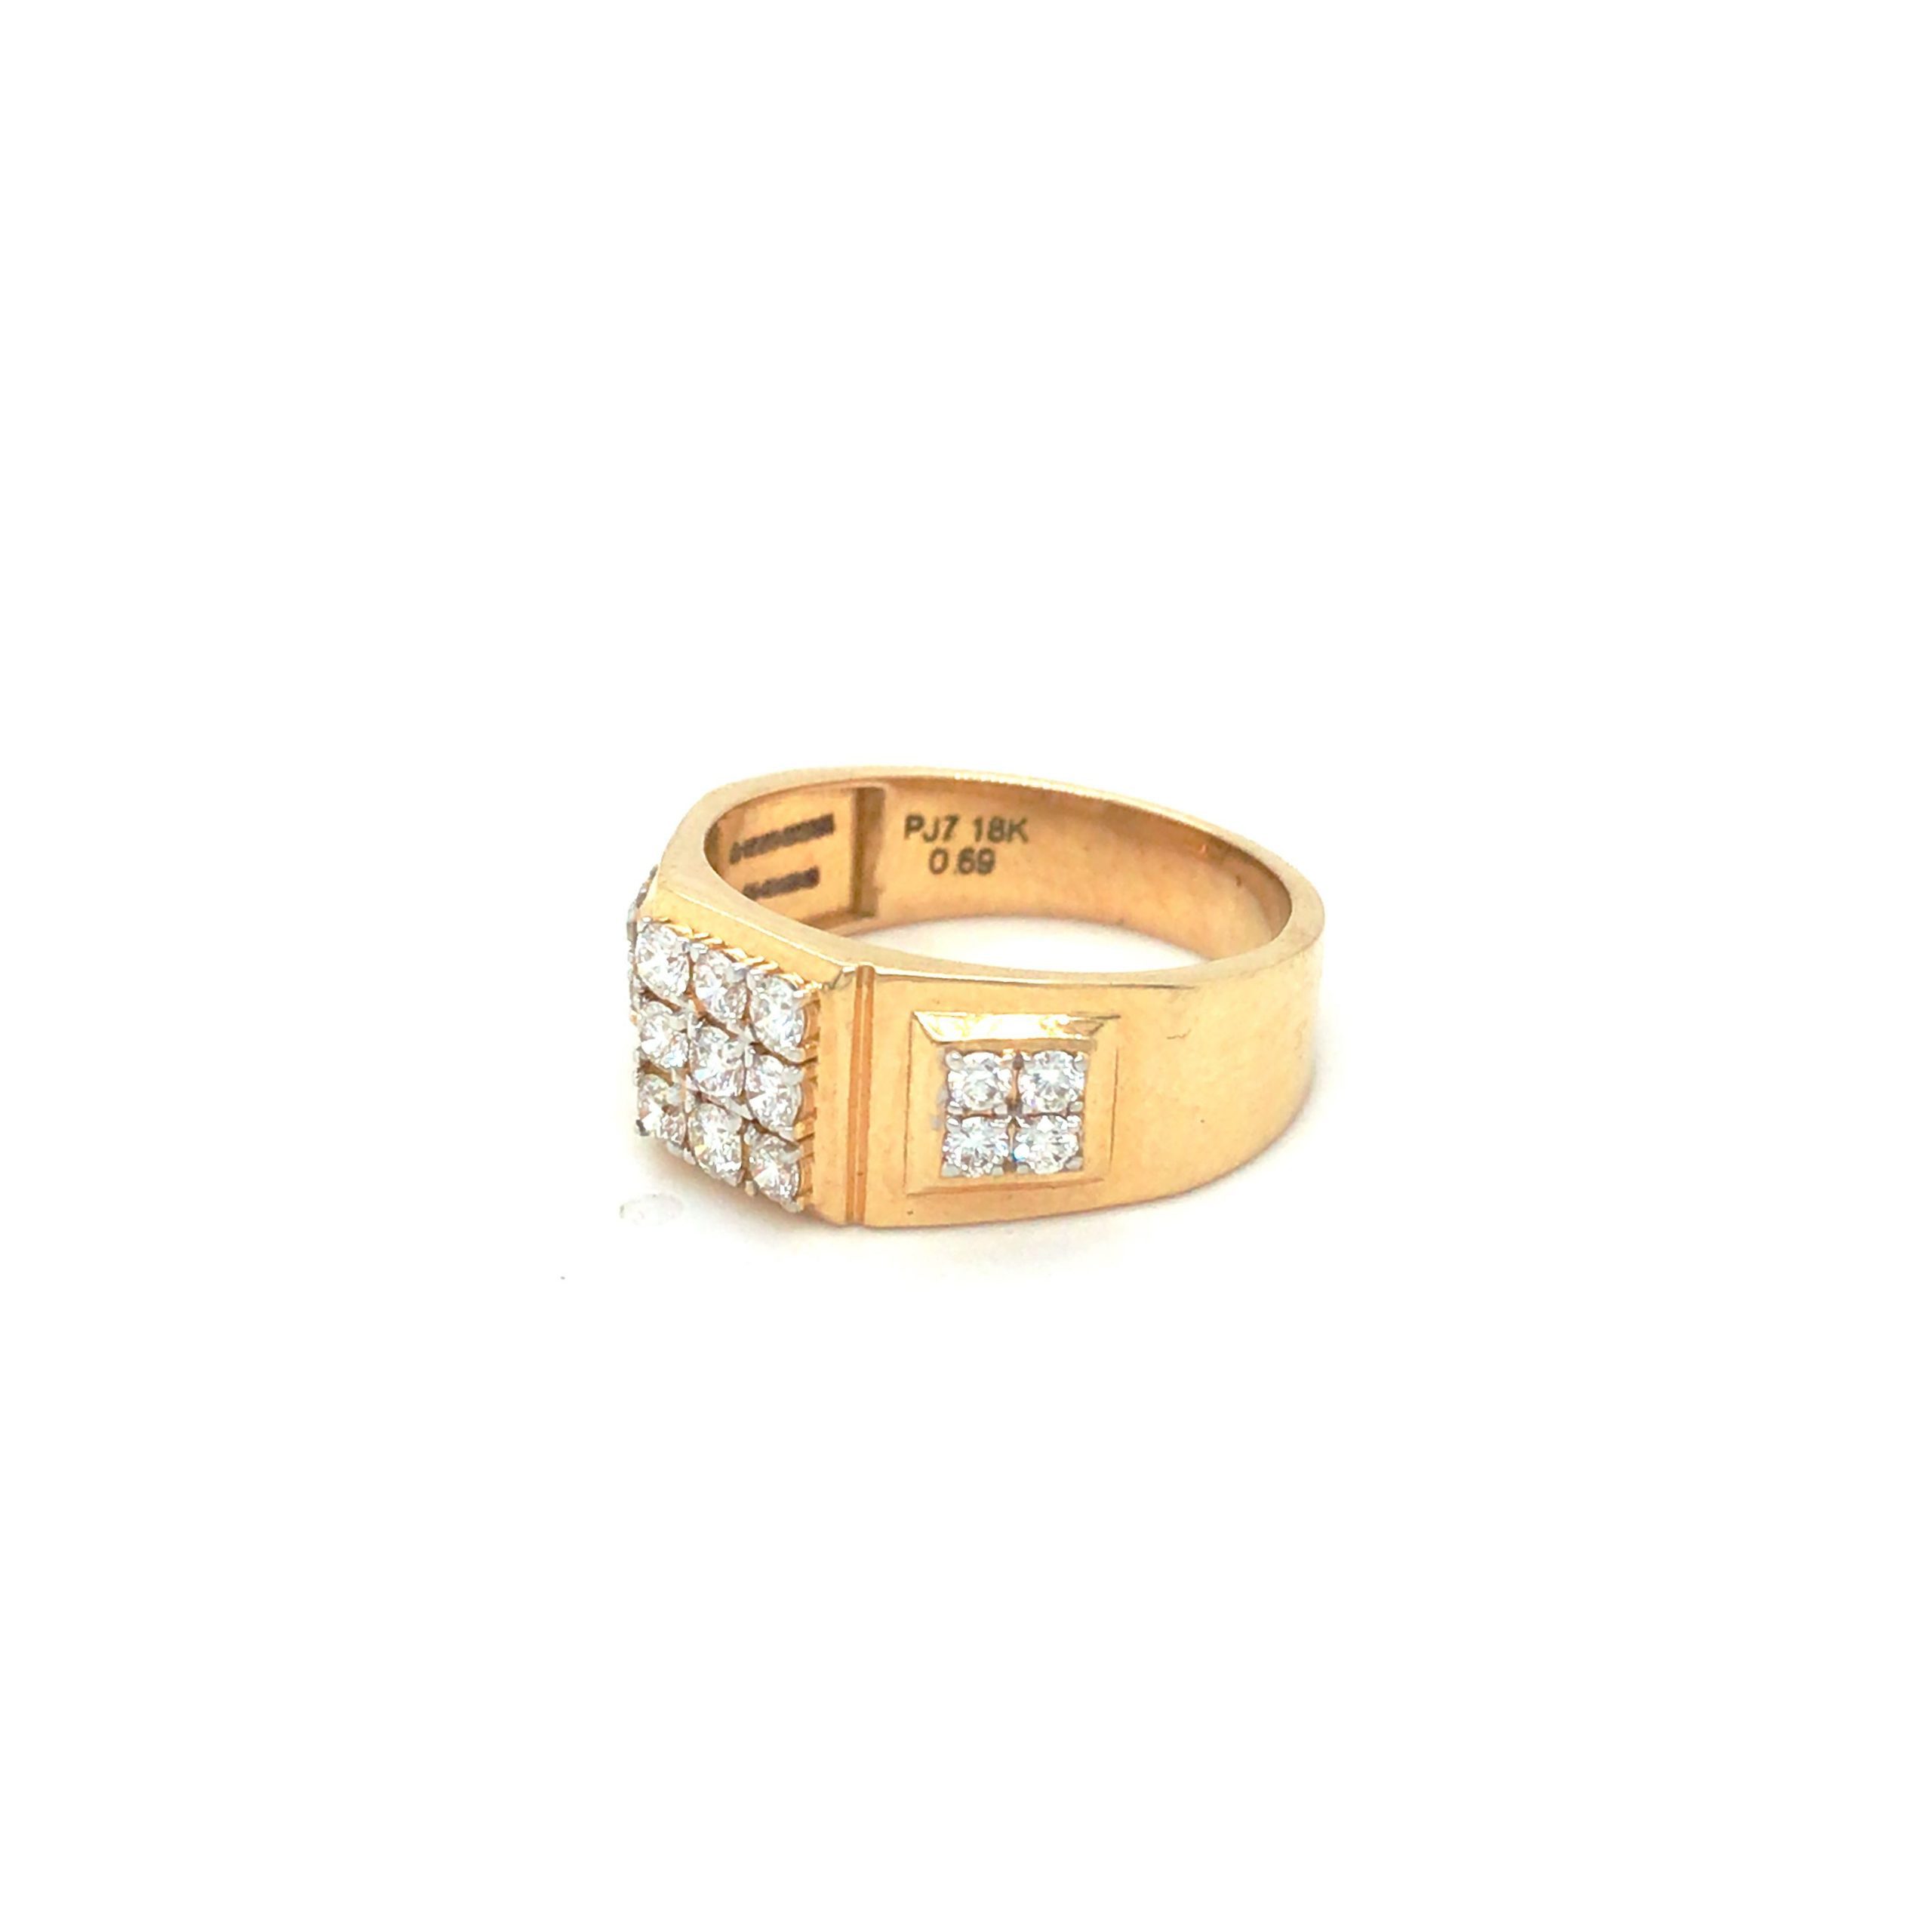 Buy Victorian 18ct Gold Solitaire Diamond Ring 1899 Online in India - Etsy